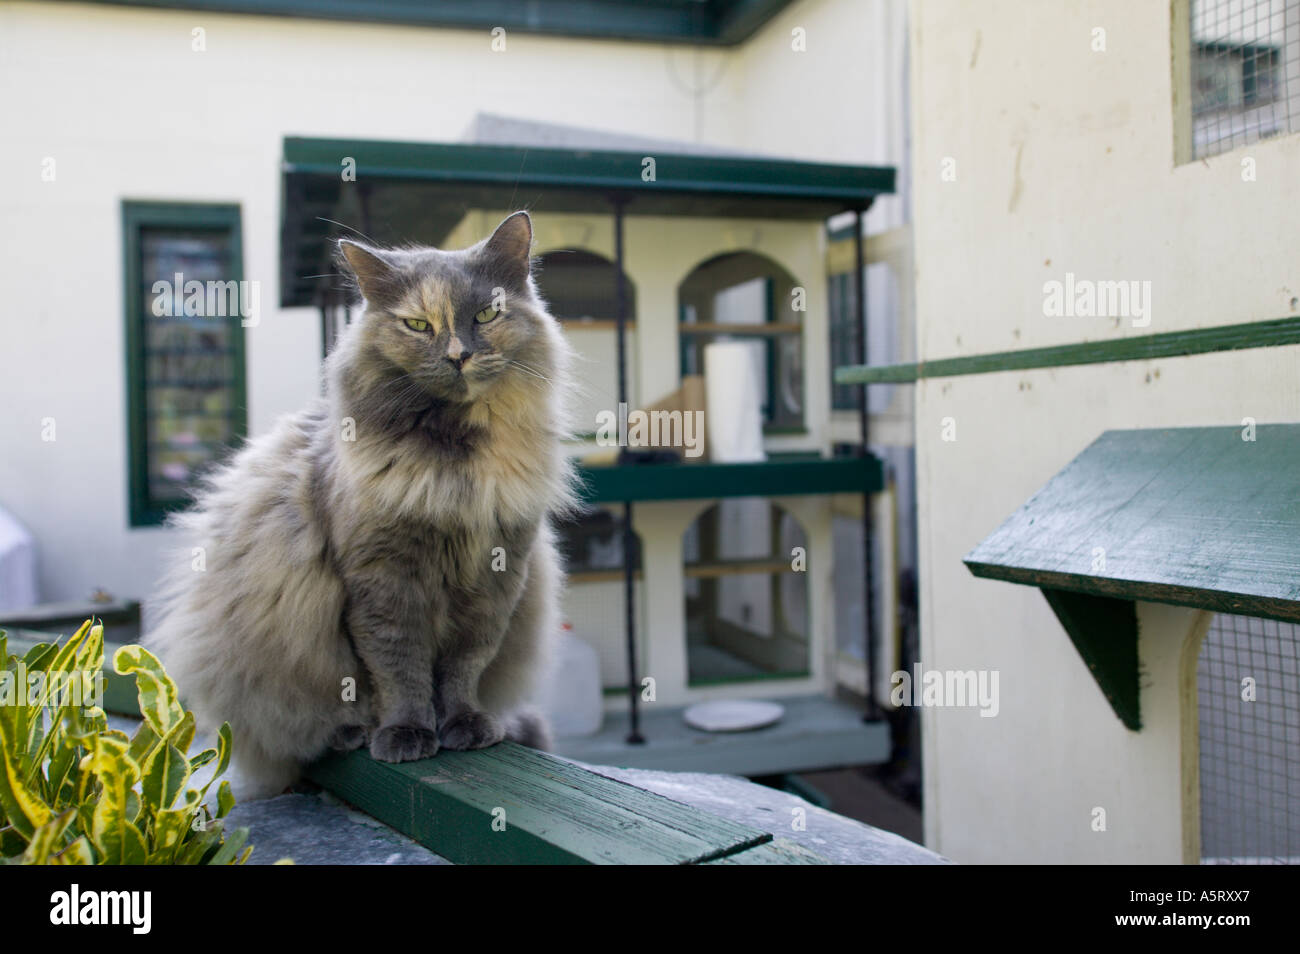 One Of The Famous House Cats At Ernest Hemingway Residence Key West Stock Photo Alamy,2 Bedroom Apartments For Rent In Philadelphia 19120